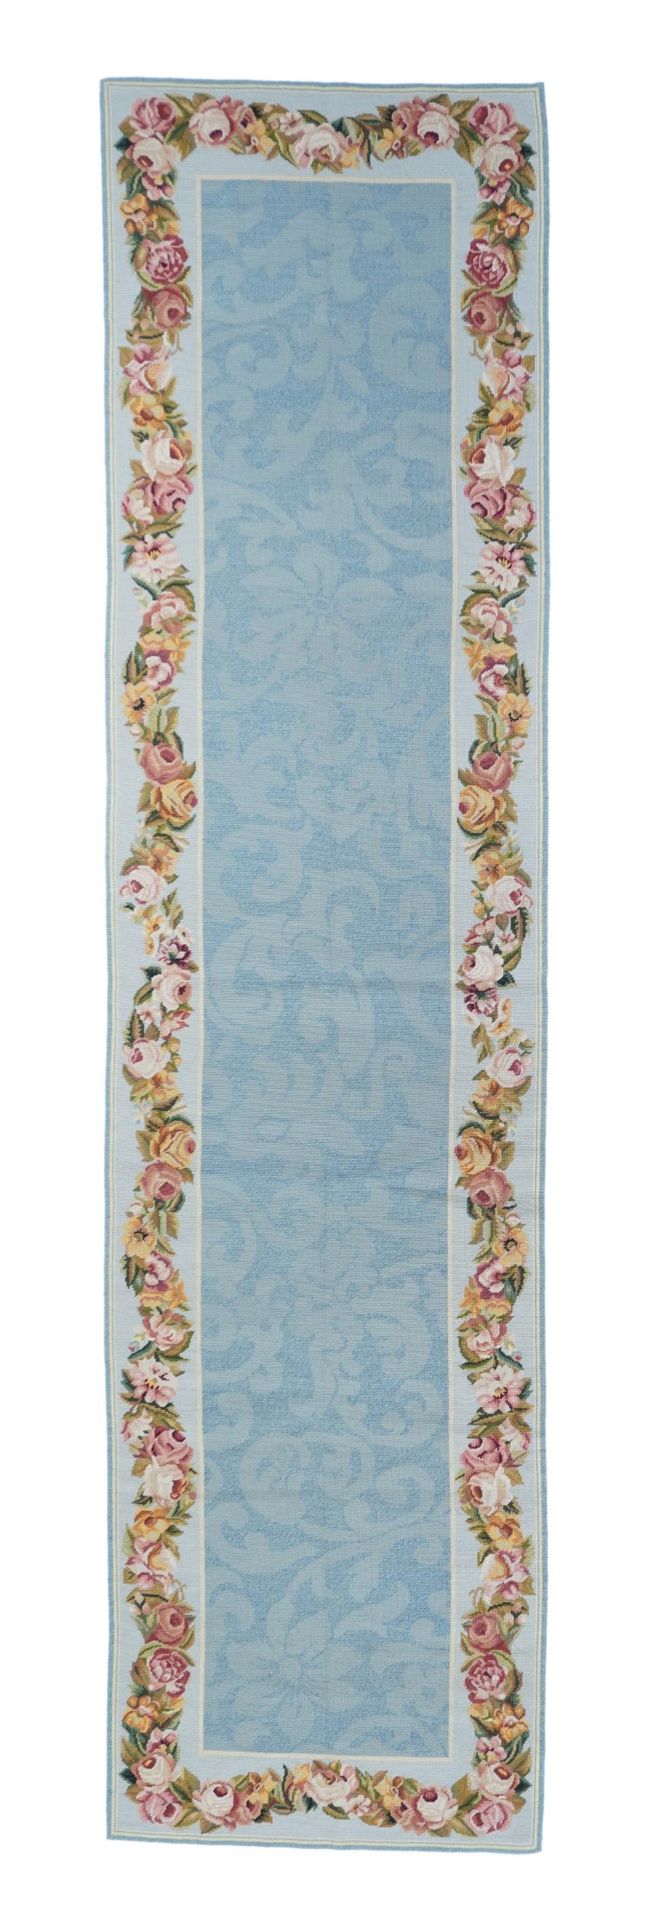 Null Needle Point Rug, 2'5" x 10' ( 0.74 x 3.05 M )